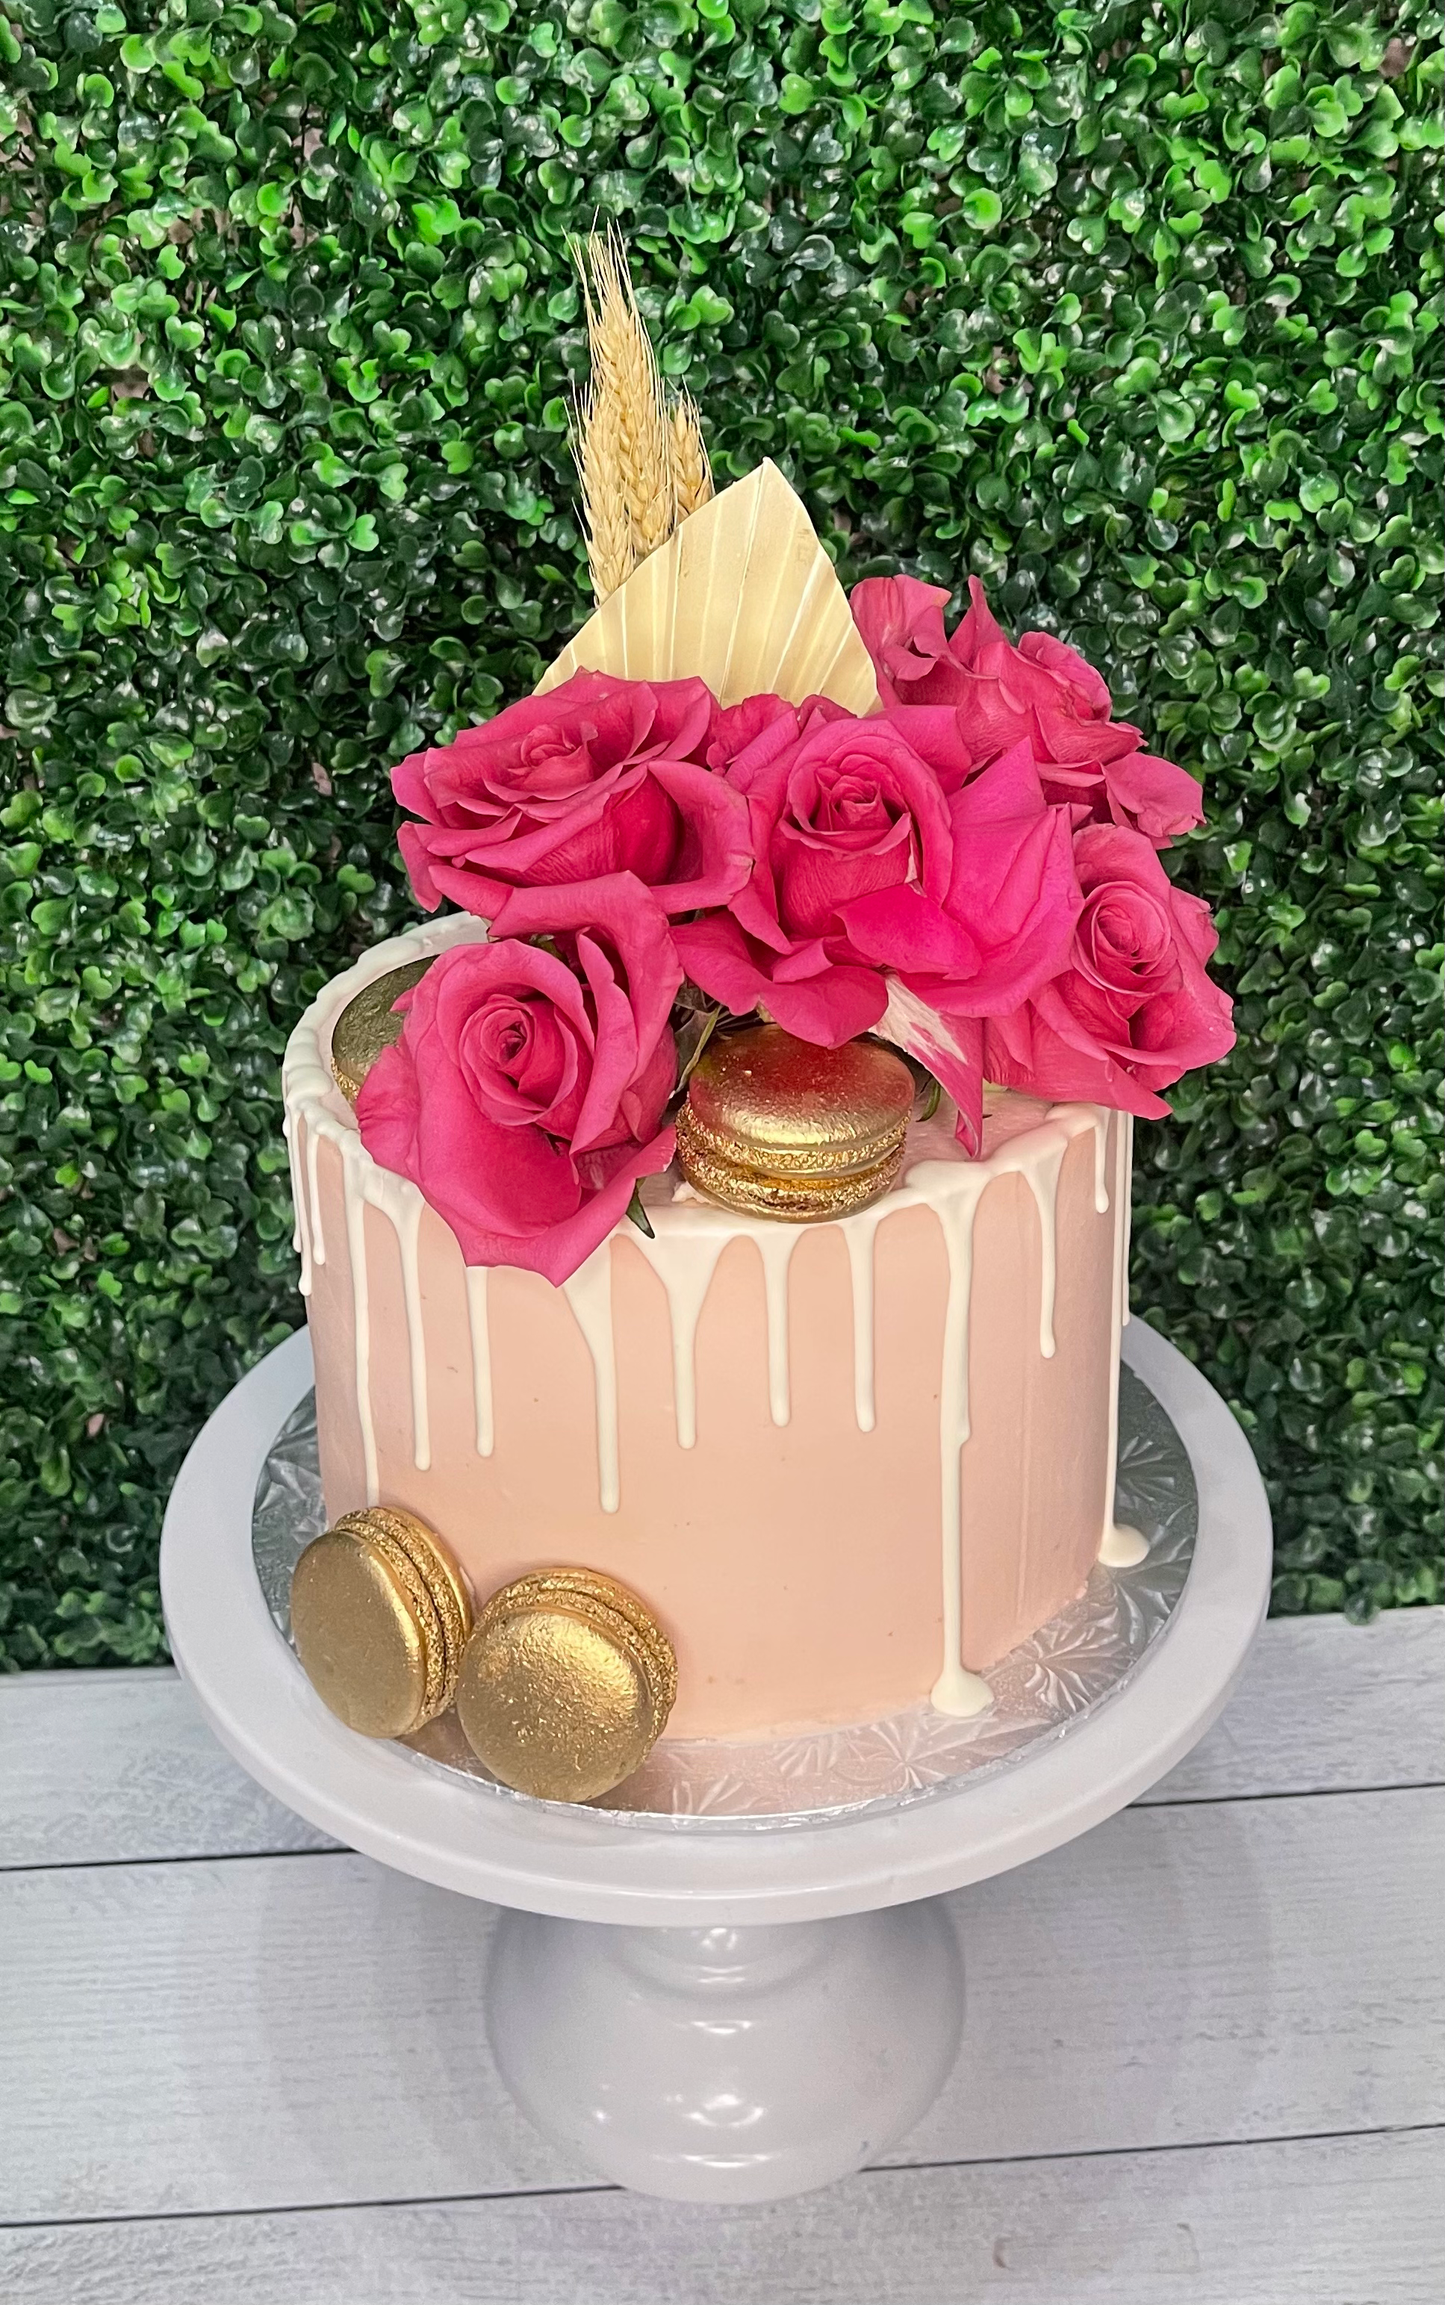 A touch of Class (Tall Cake)